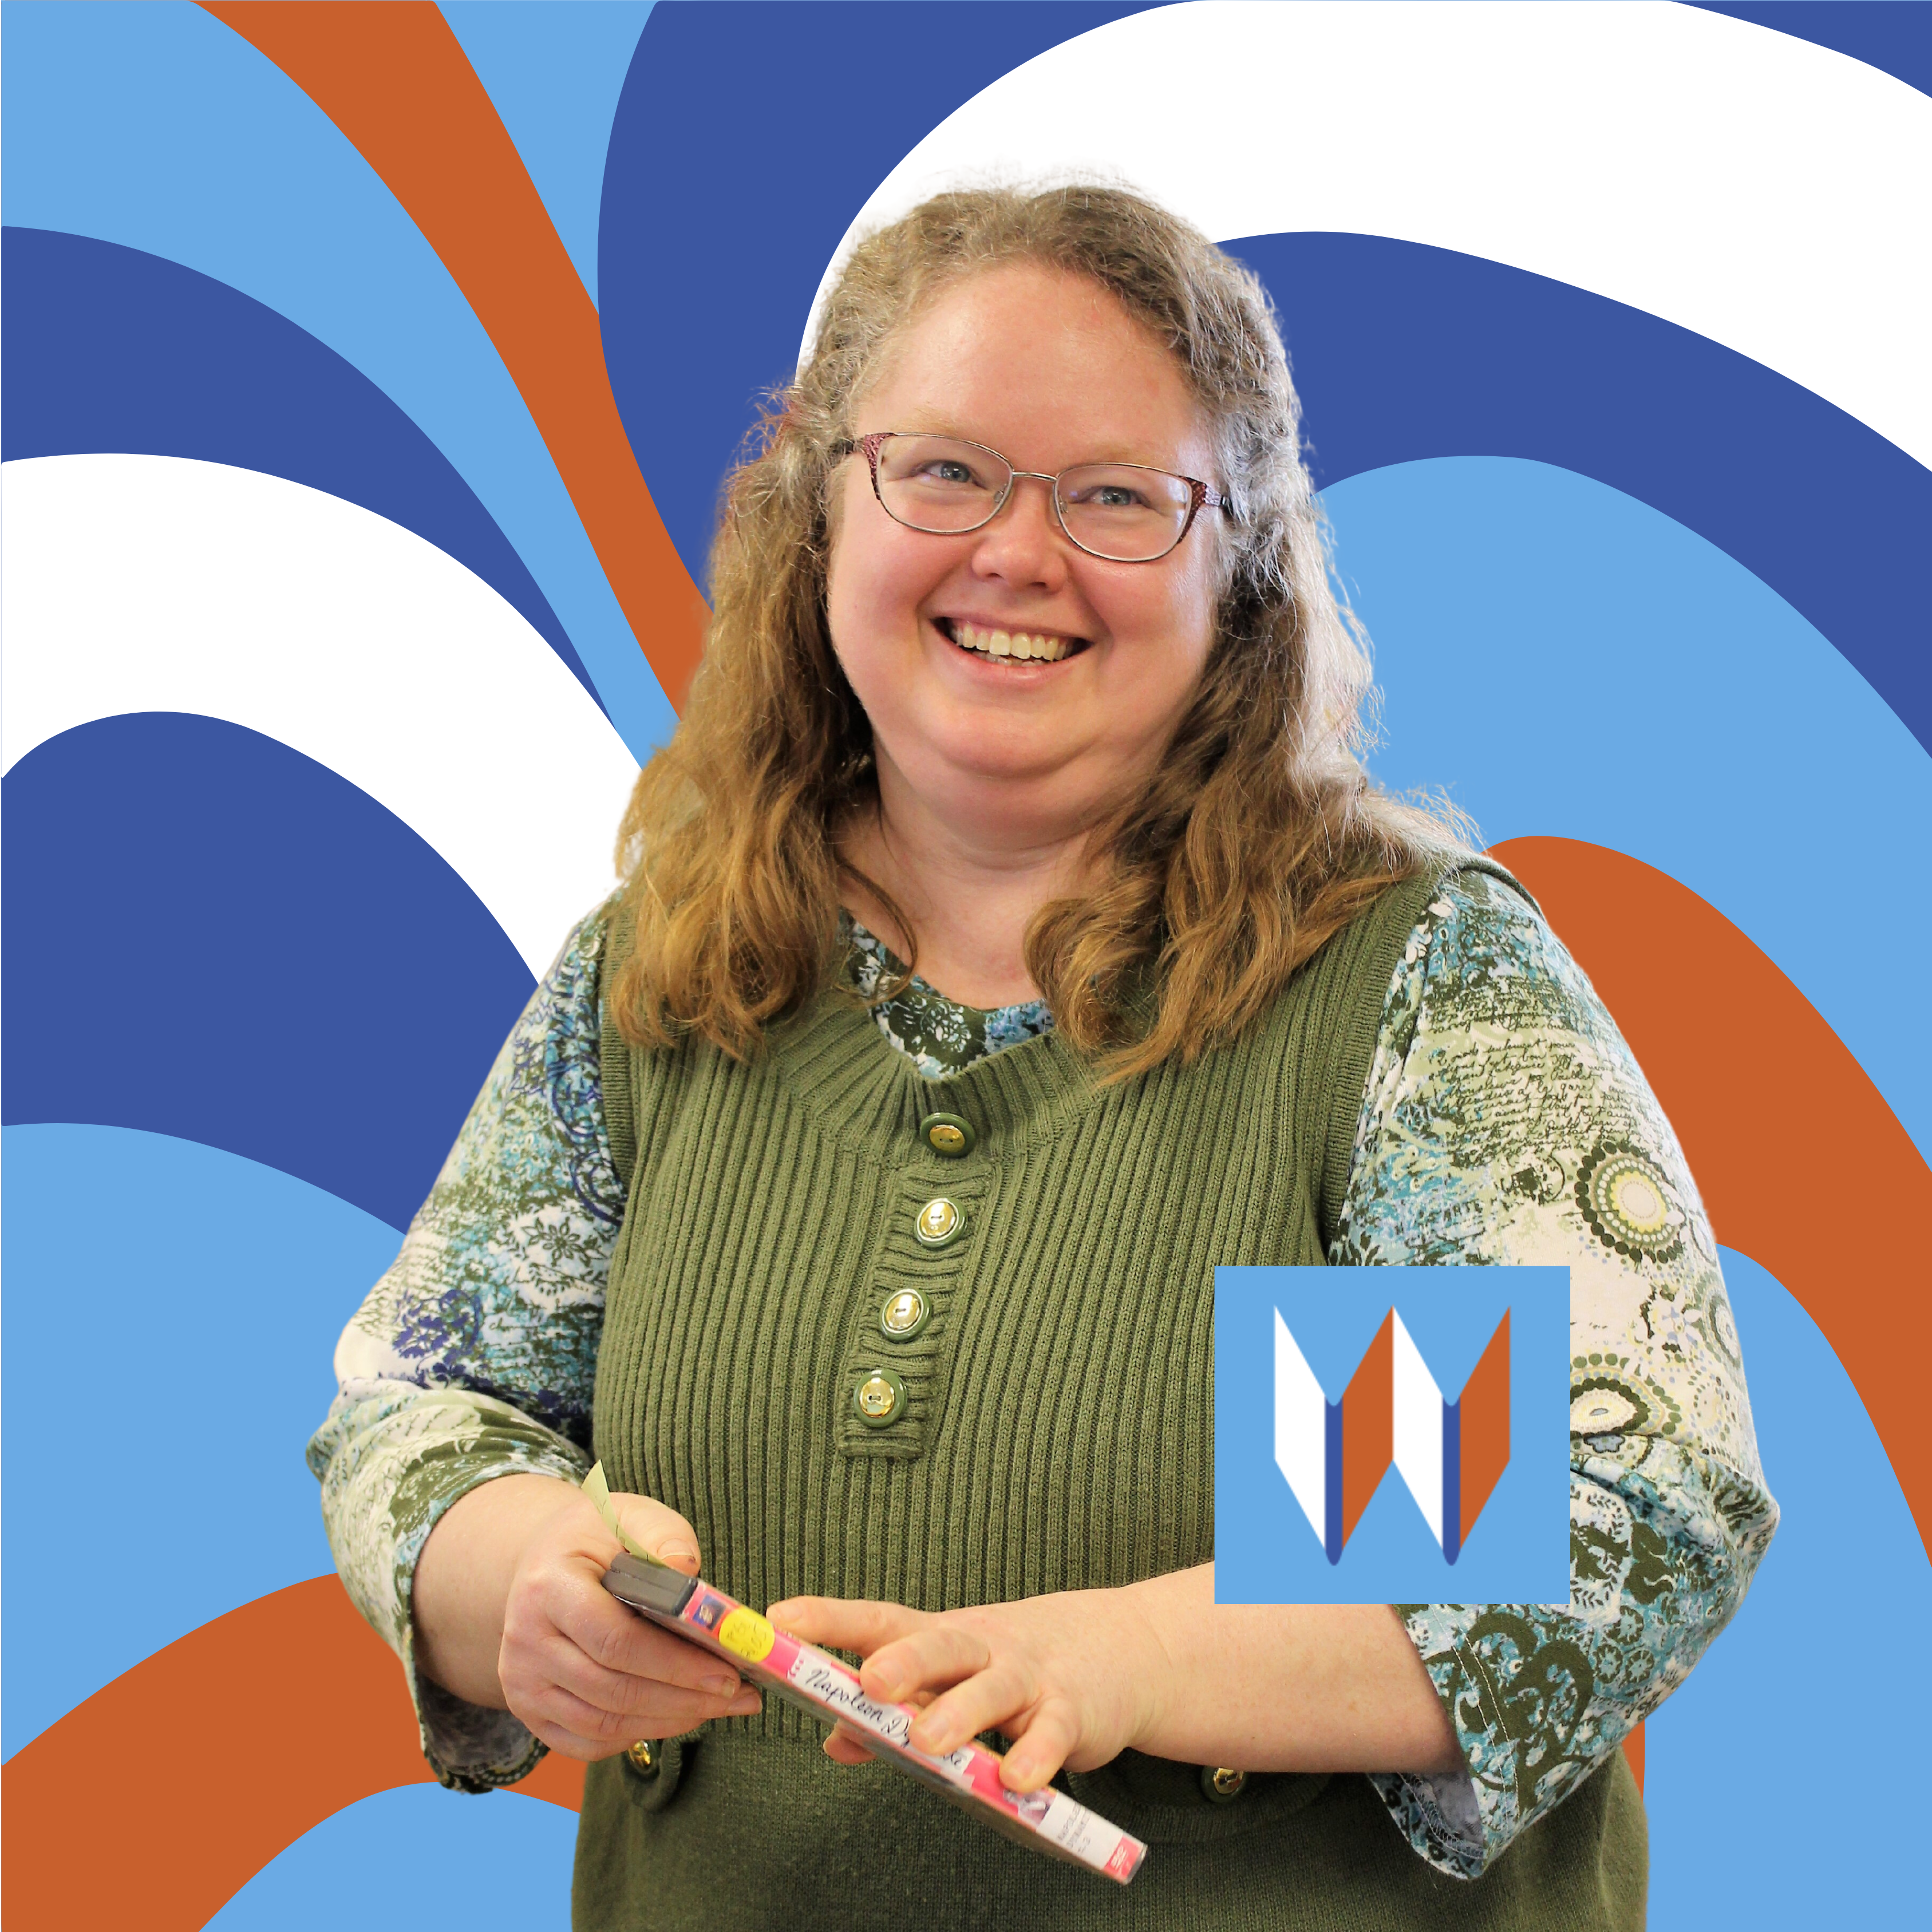 Marcy, our Rosalia branch manager, poses in front of orange, white, and blue swirls.